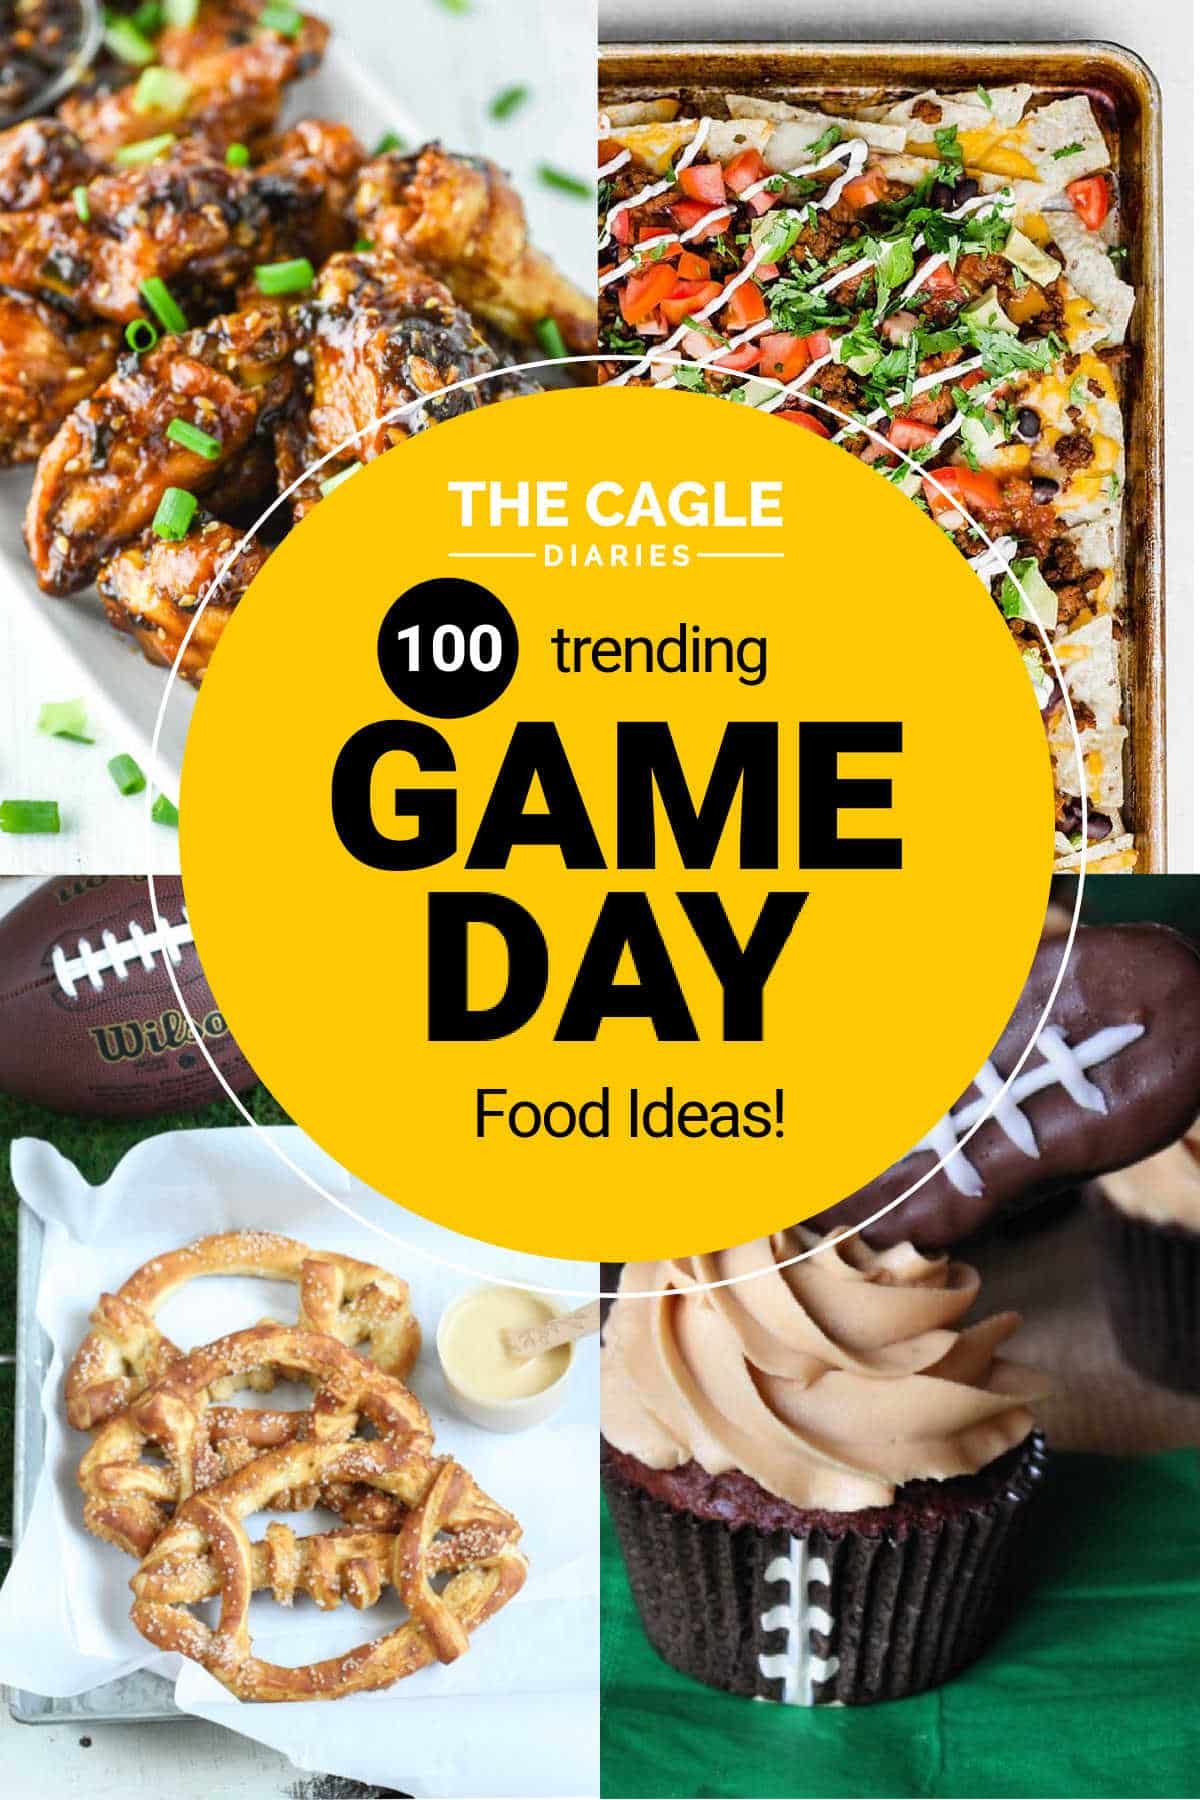 collage of 4 images of game day food, football cupcake, football shaped pretzel, nachos and wings